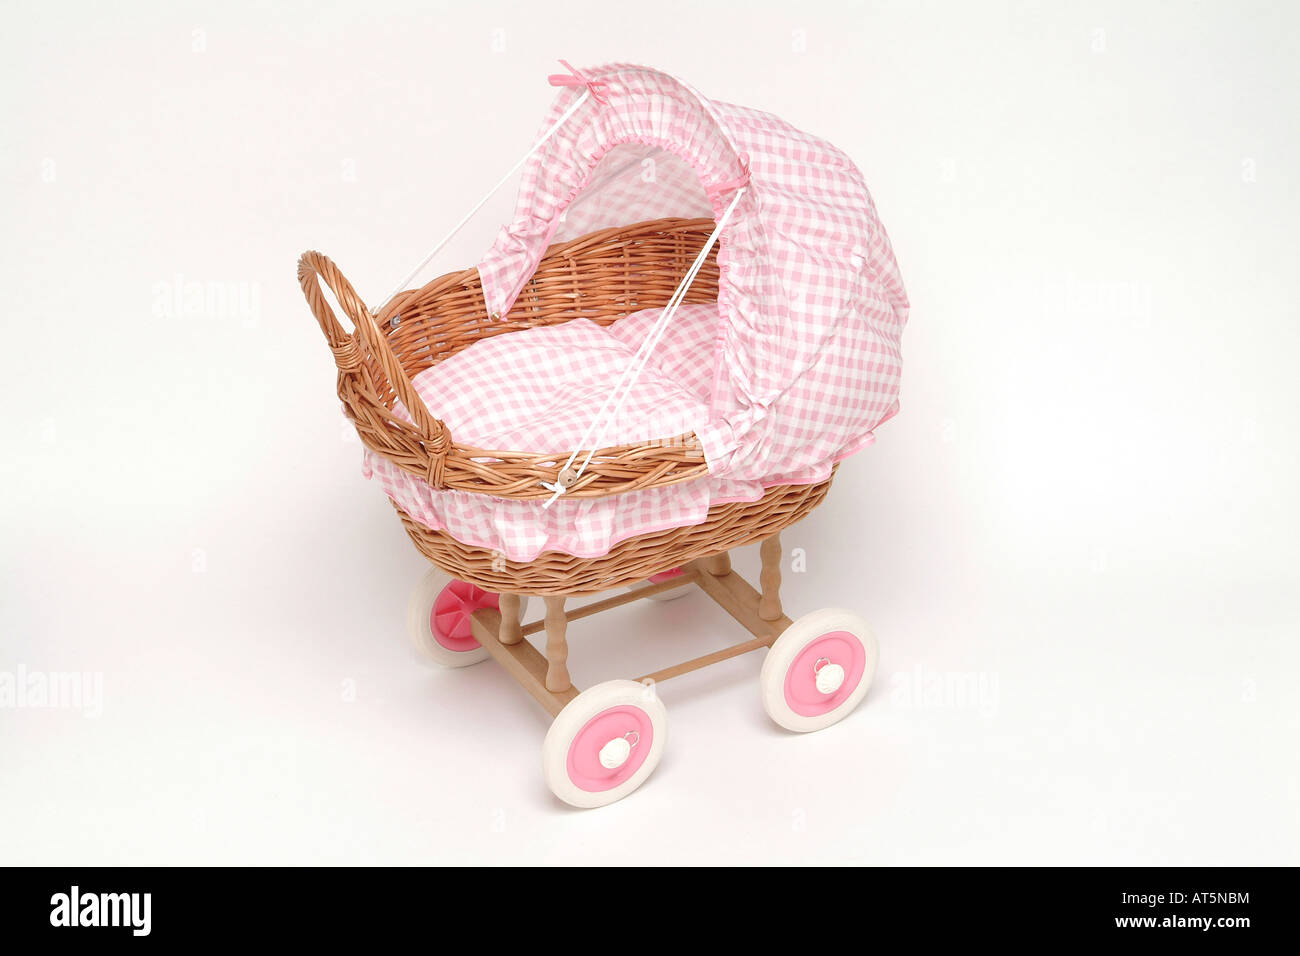 Wicker doll's pram with pink gingham covers Stock Photo